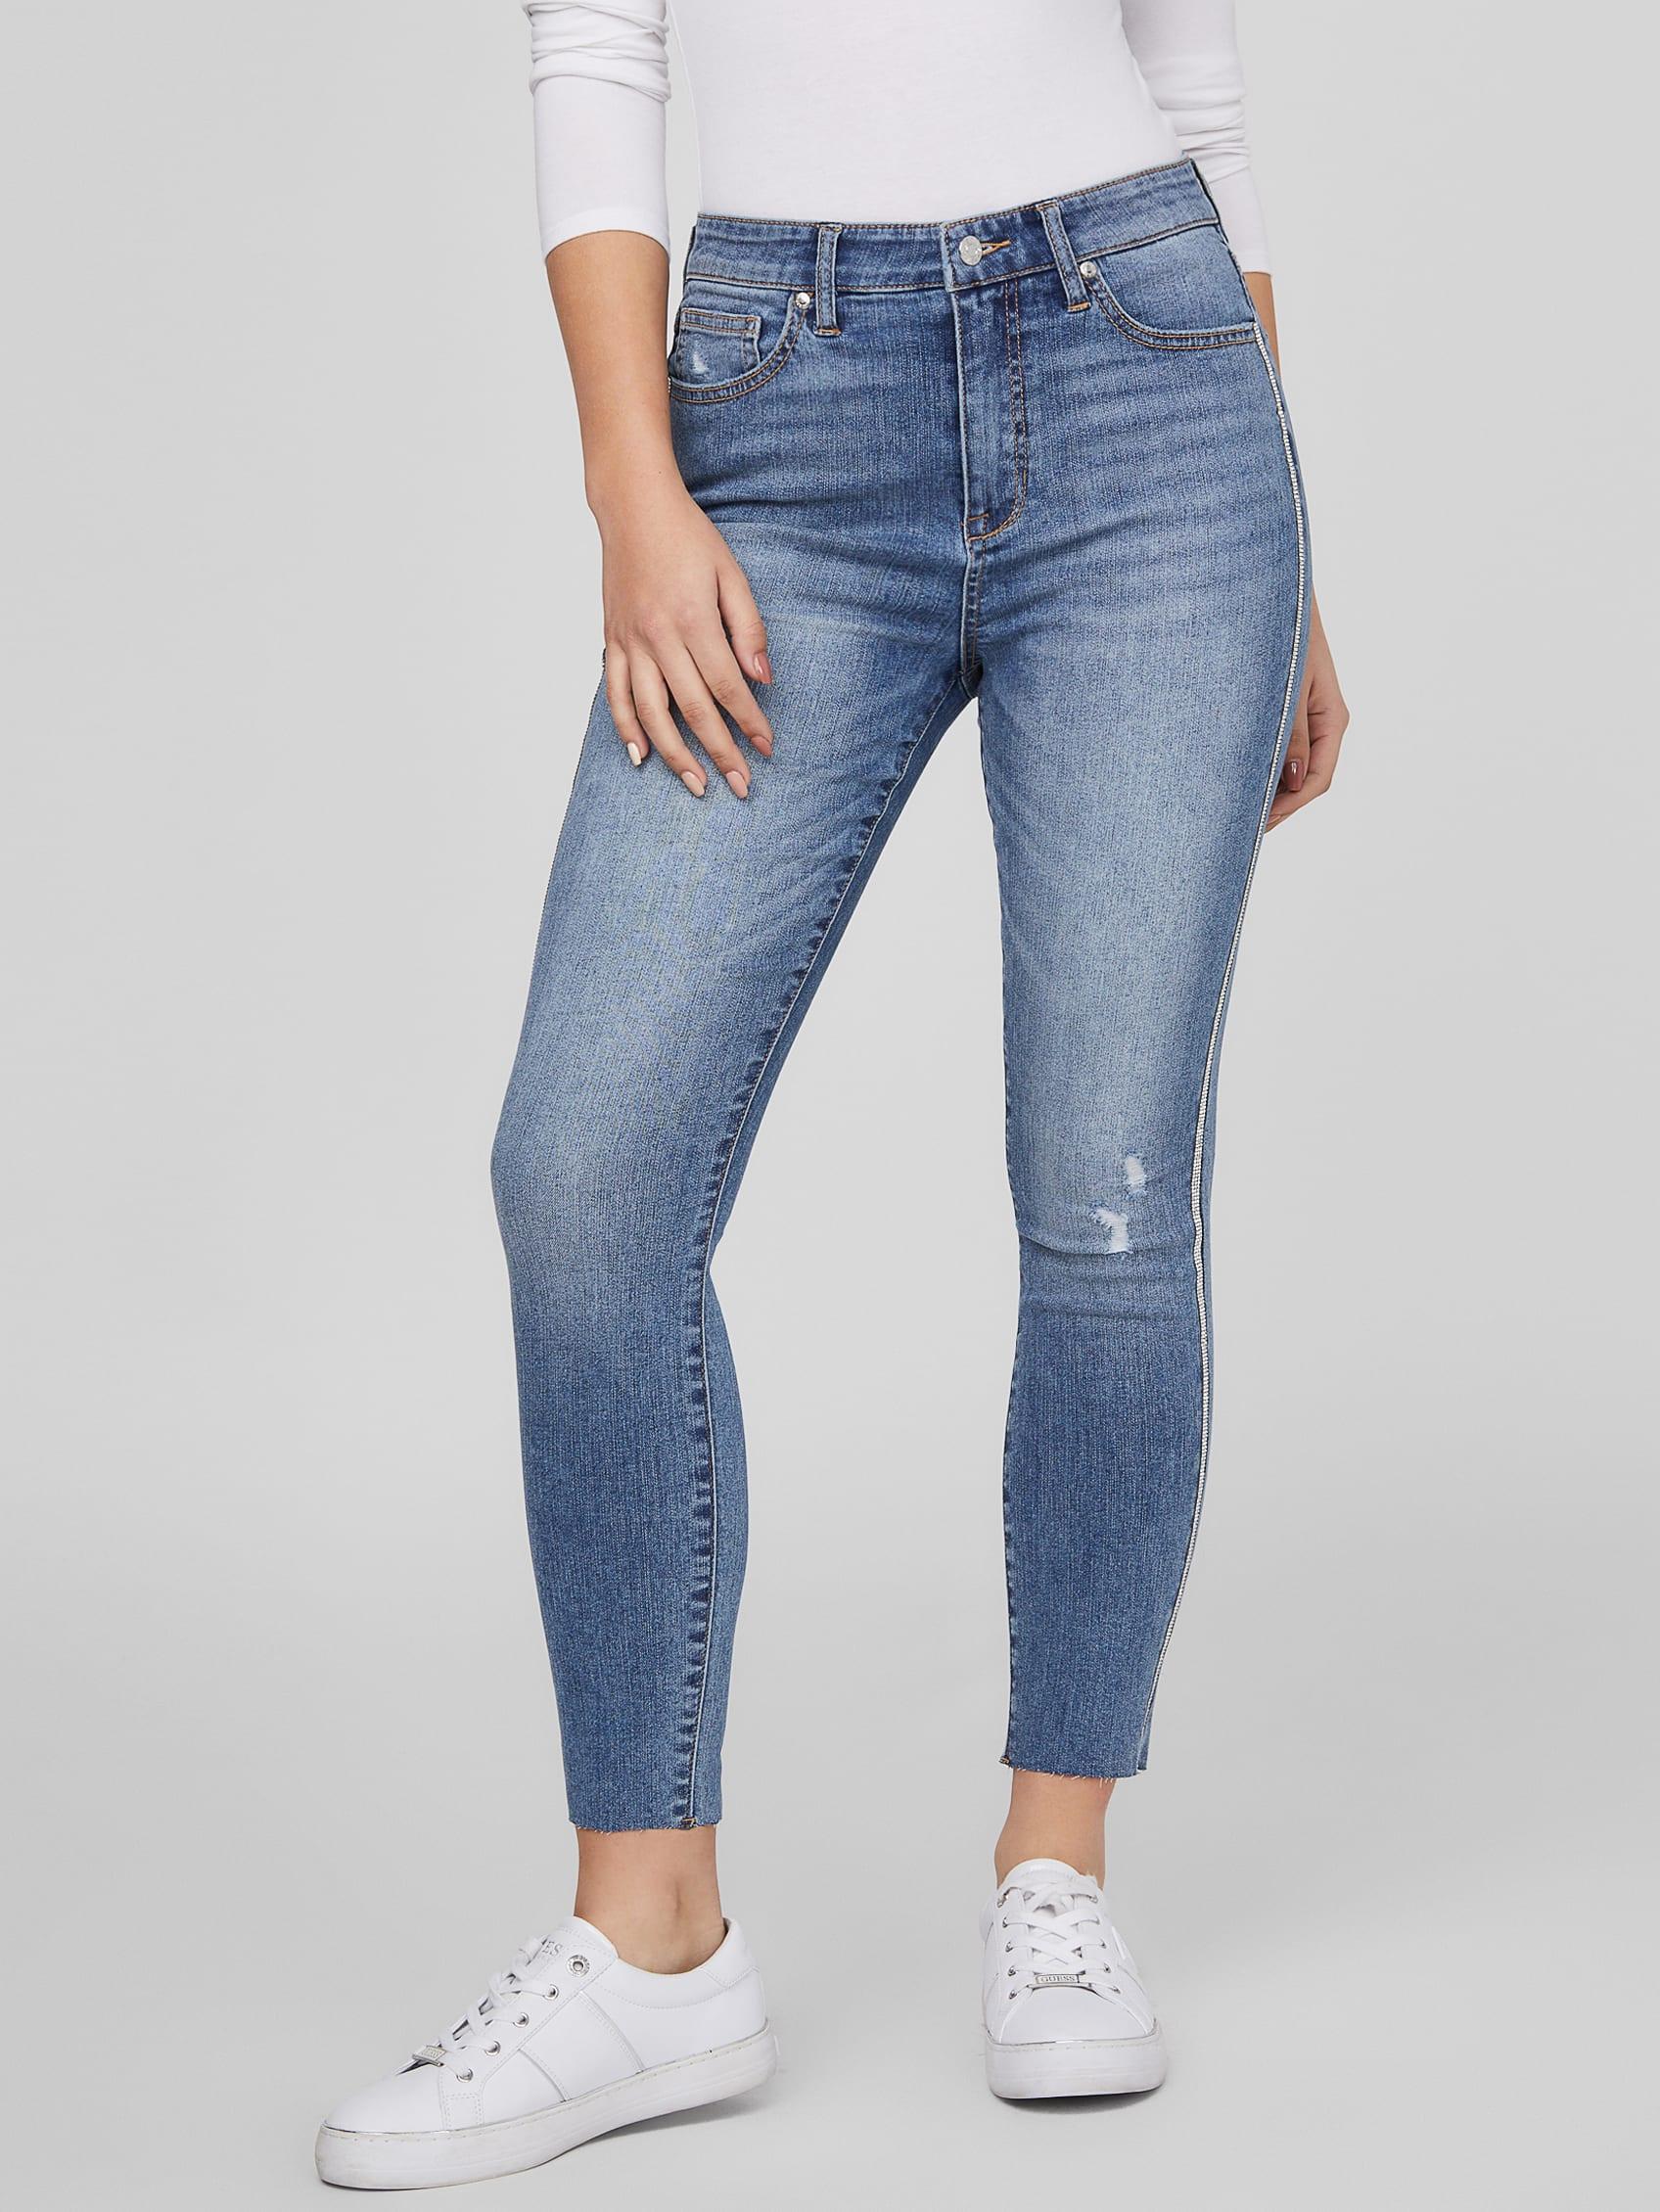 Guess Factory Piata Crystal Trim Skinny Jeans in Blue | Lyst